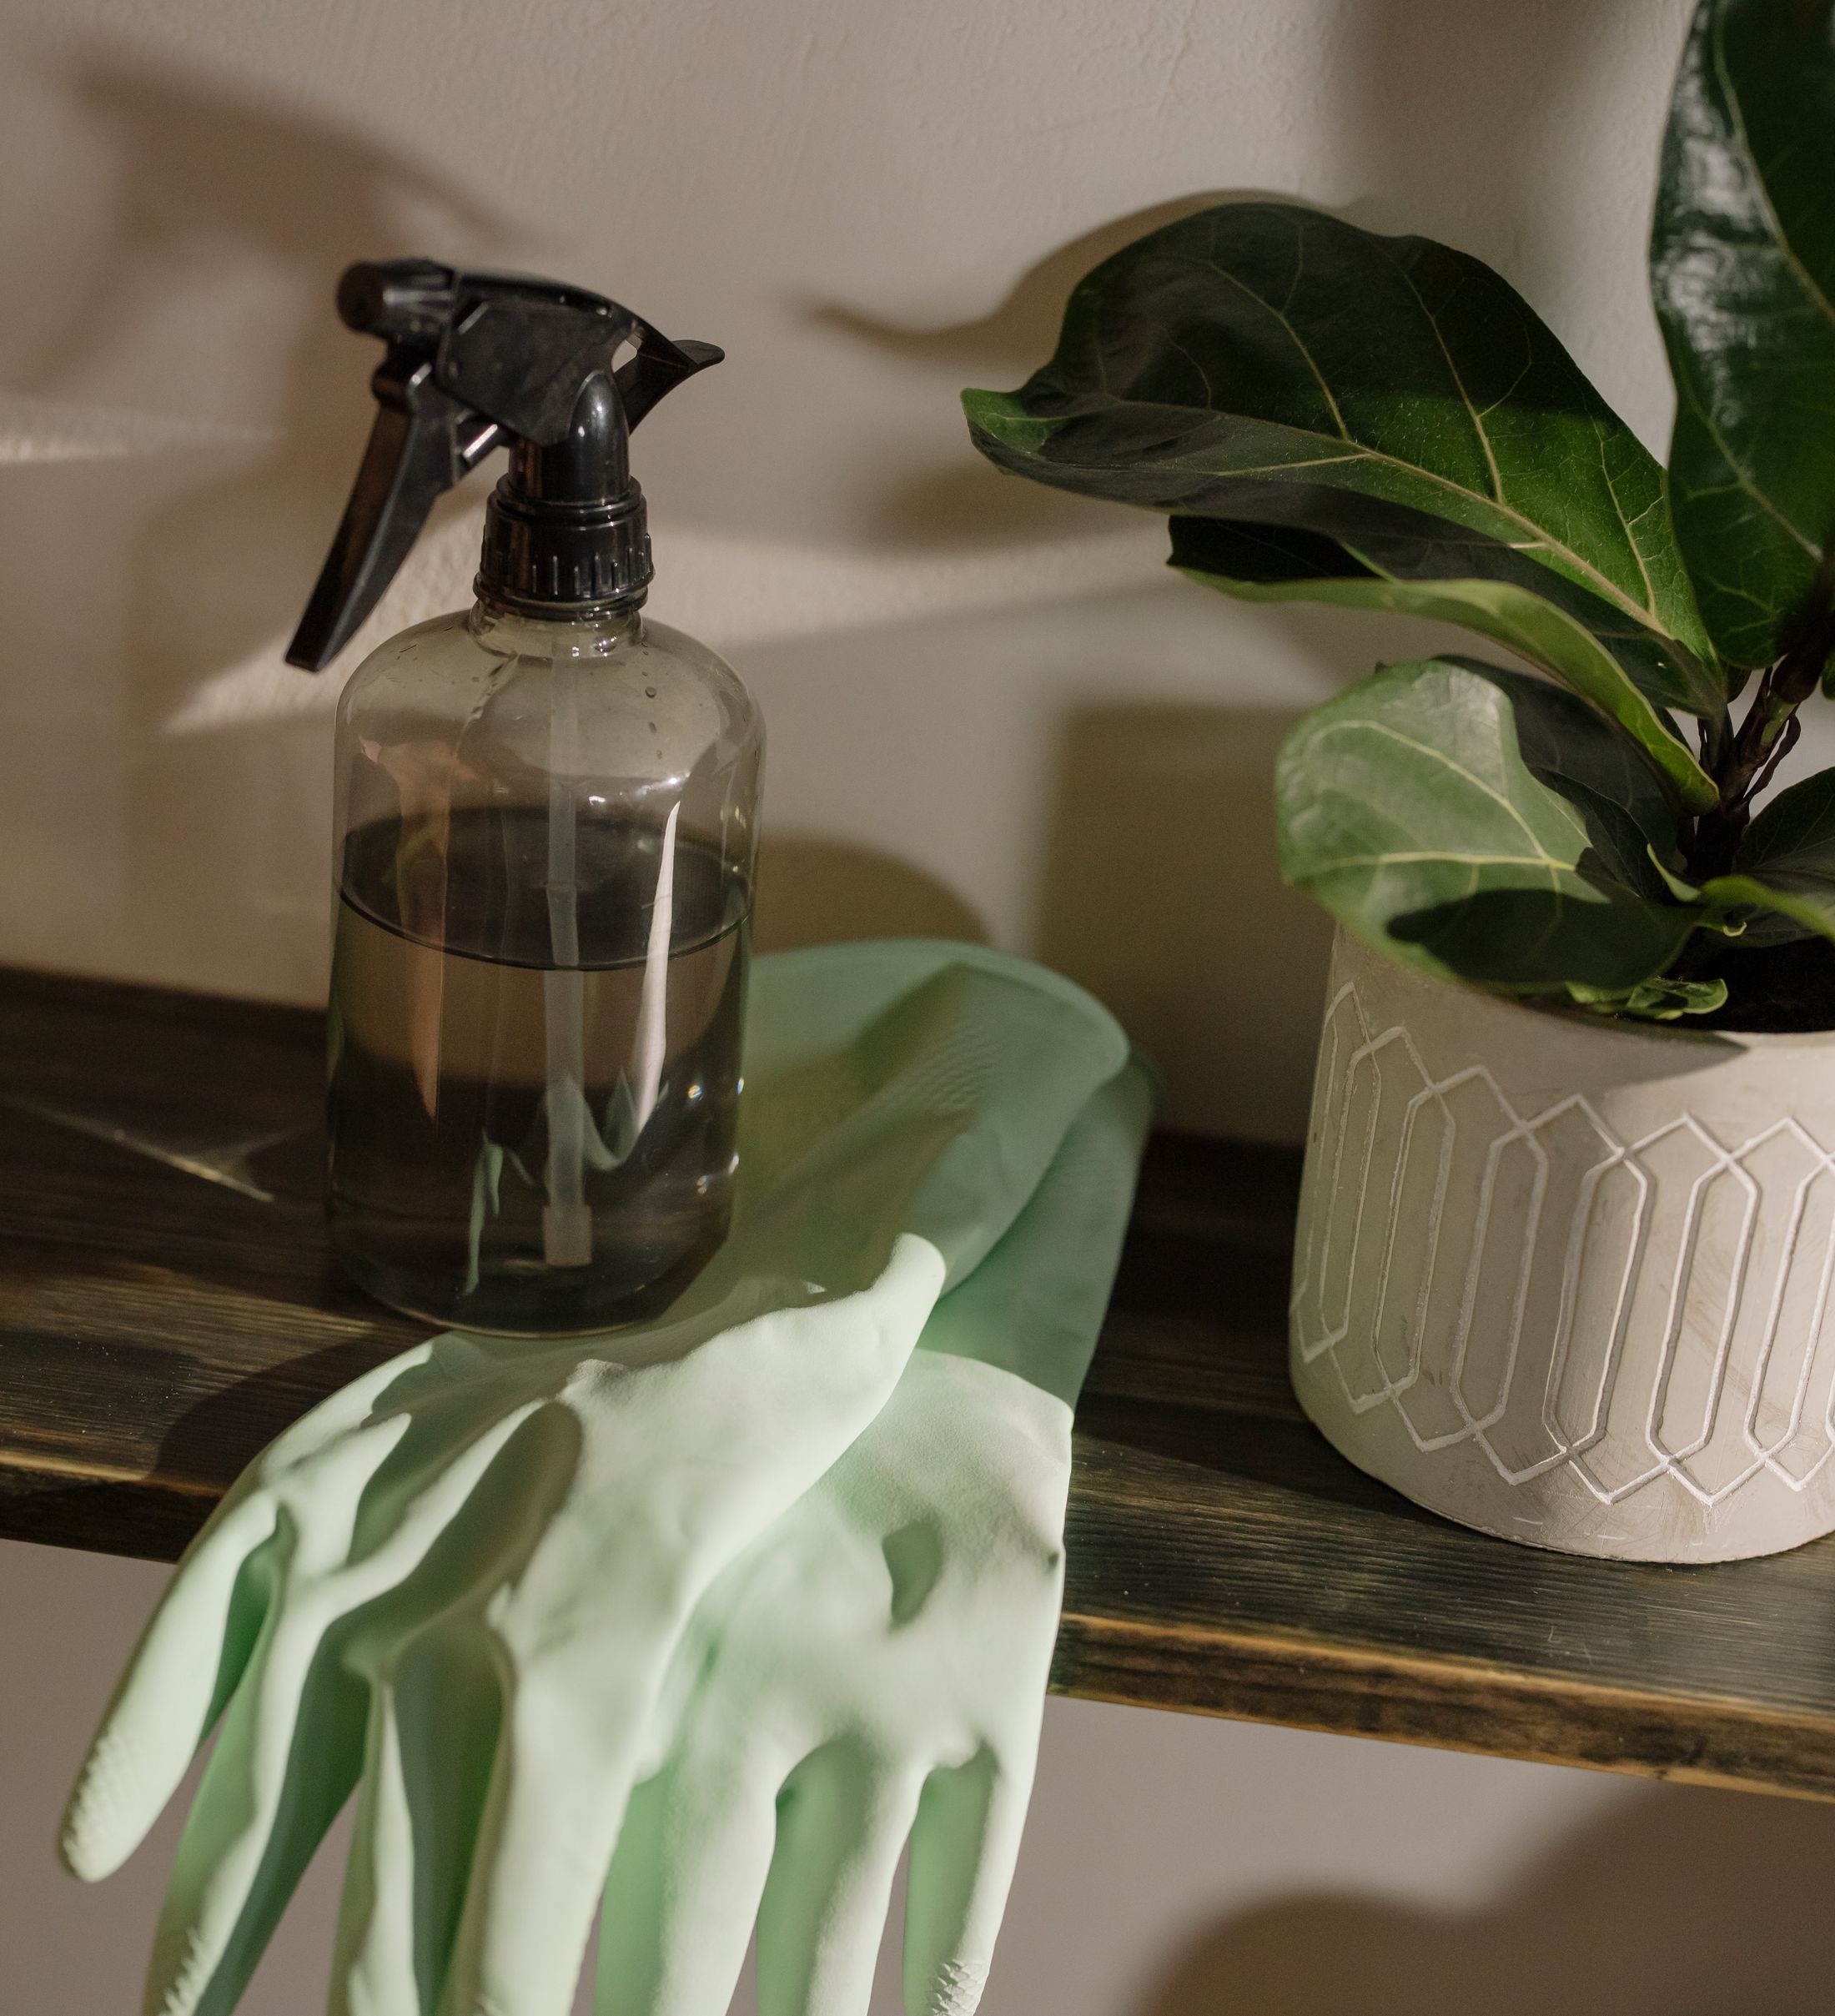 Not all household products are created equal. What cleaning products should you skip over to help improve and maintain your indoor air quality?